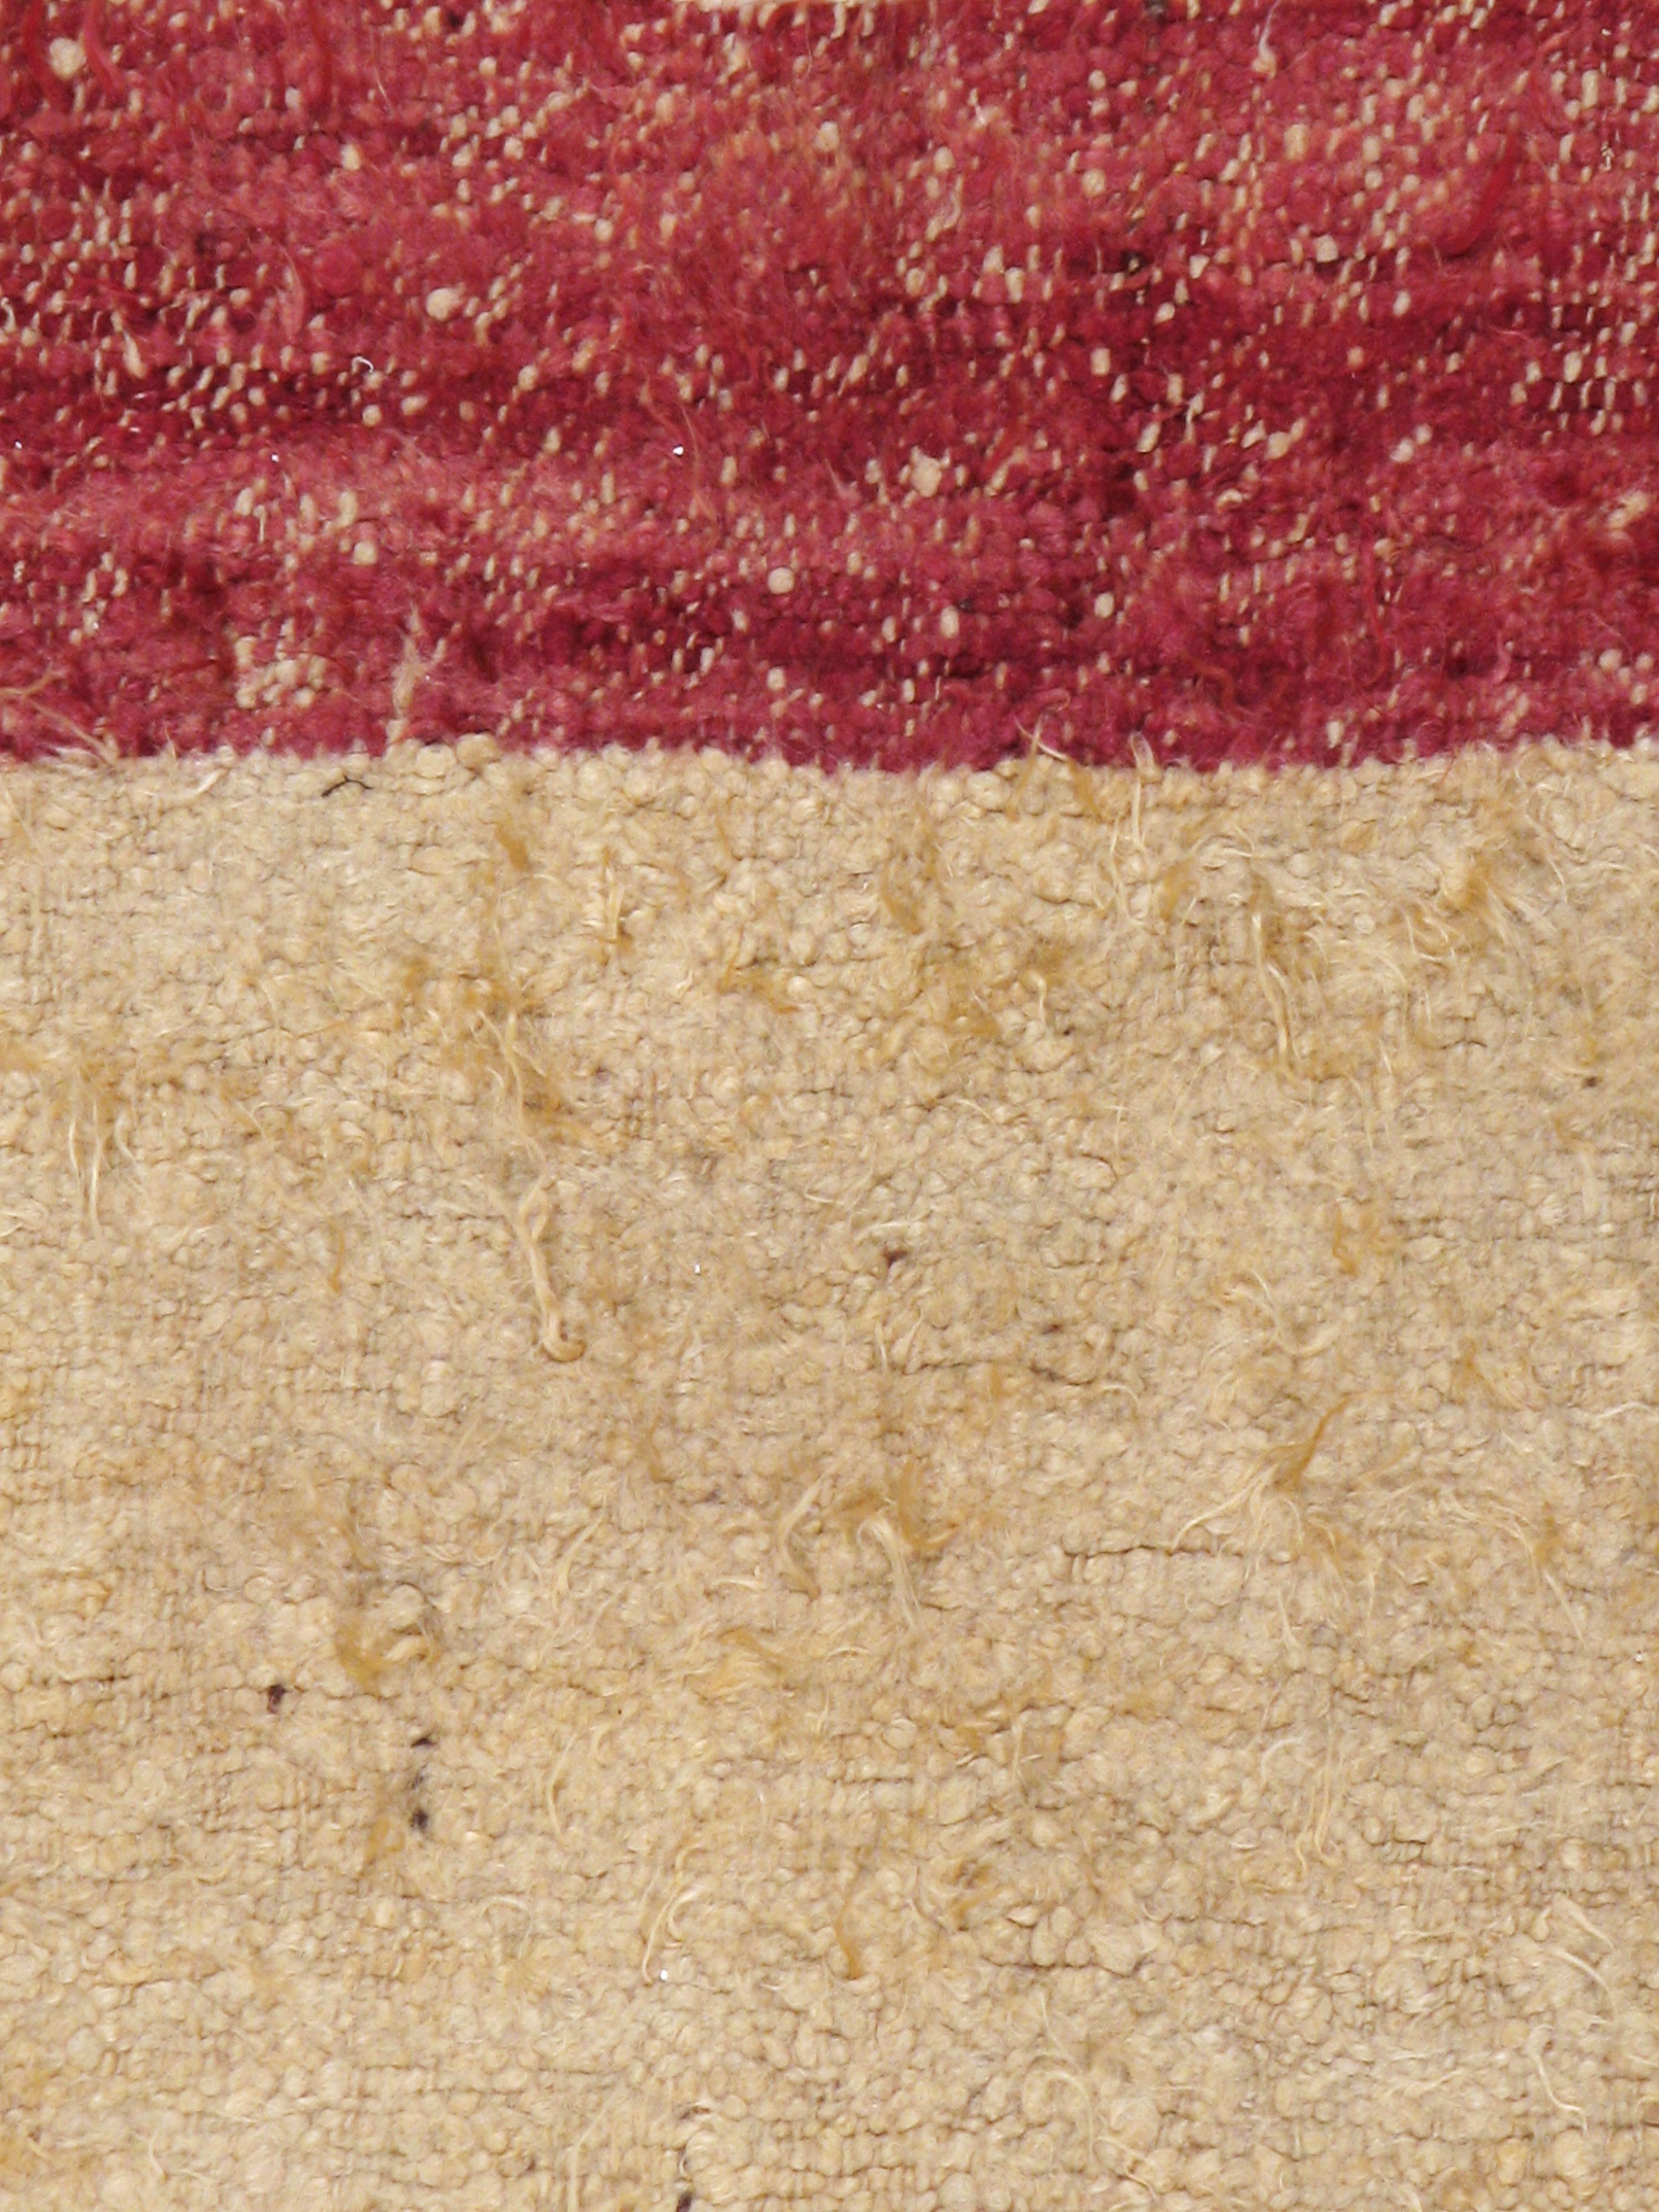 A vintage Tulu Turkish rug from the mid-20th century. A wide plain saturated marsala colored border with a beige open field. No ditzy ornamentation. Totally graphic with a very long pile. This is probably what rugs looked like thousands of years